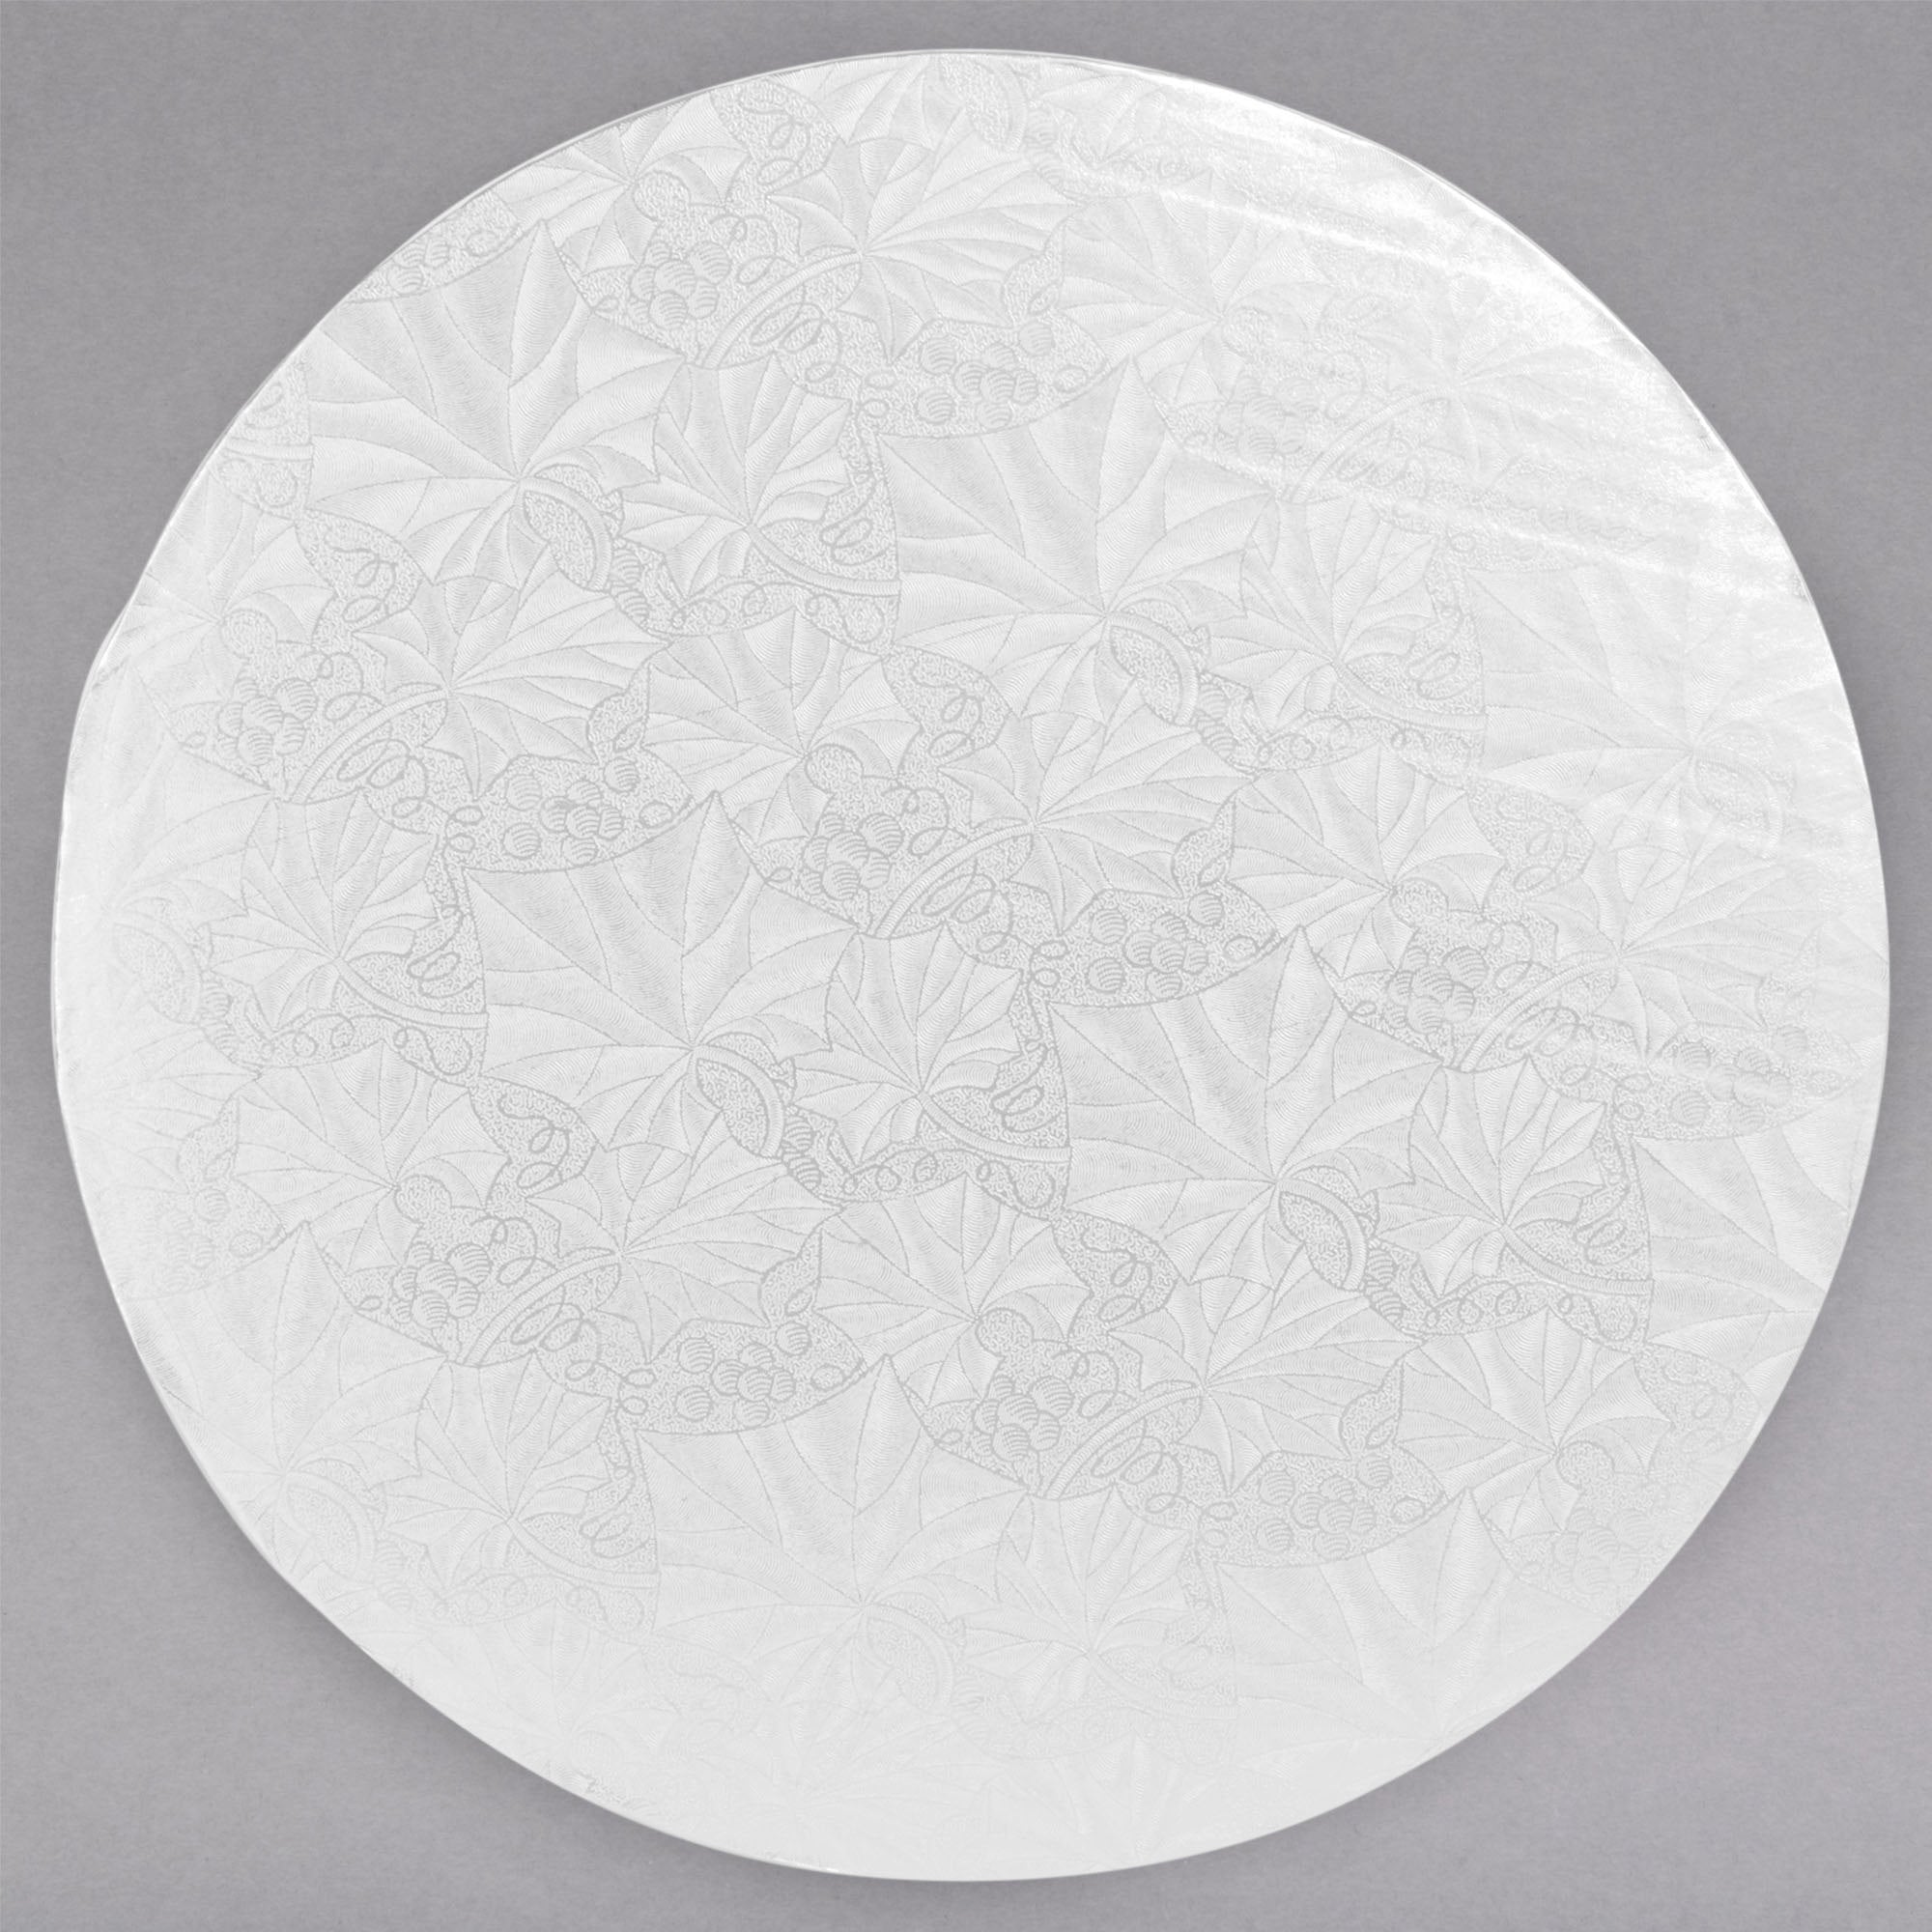 image of a 12 inch white round cake drum that is 1/4 inch thick